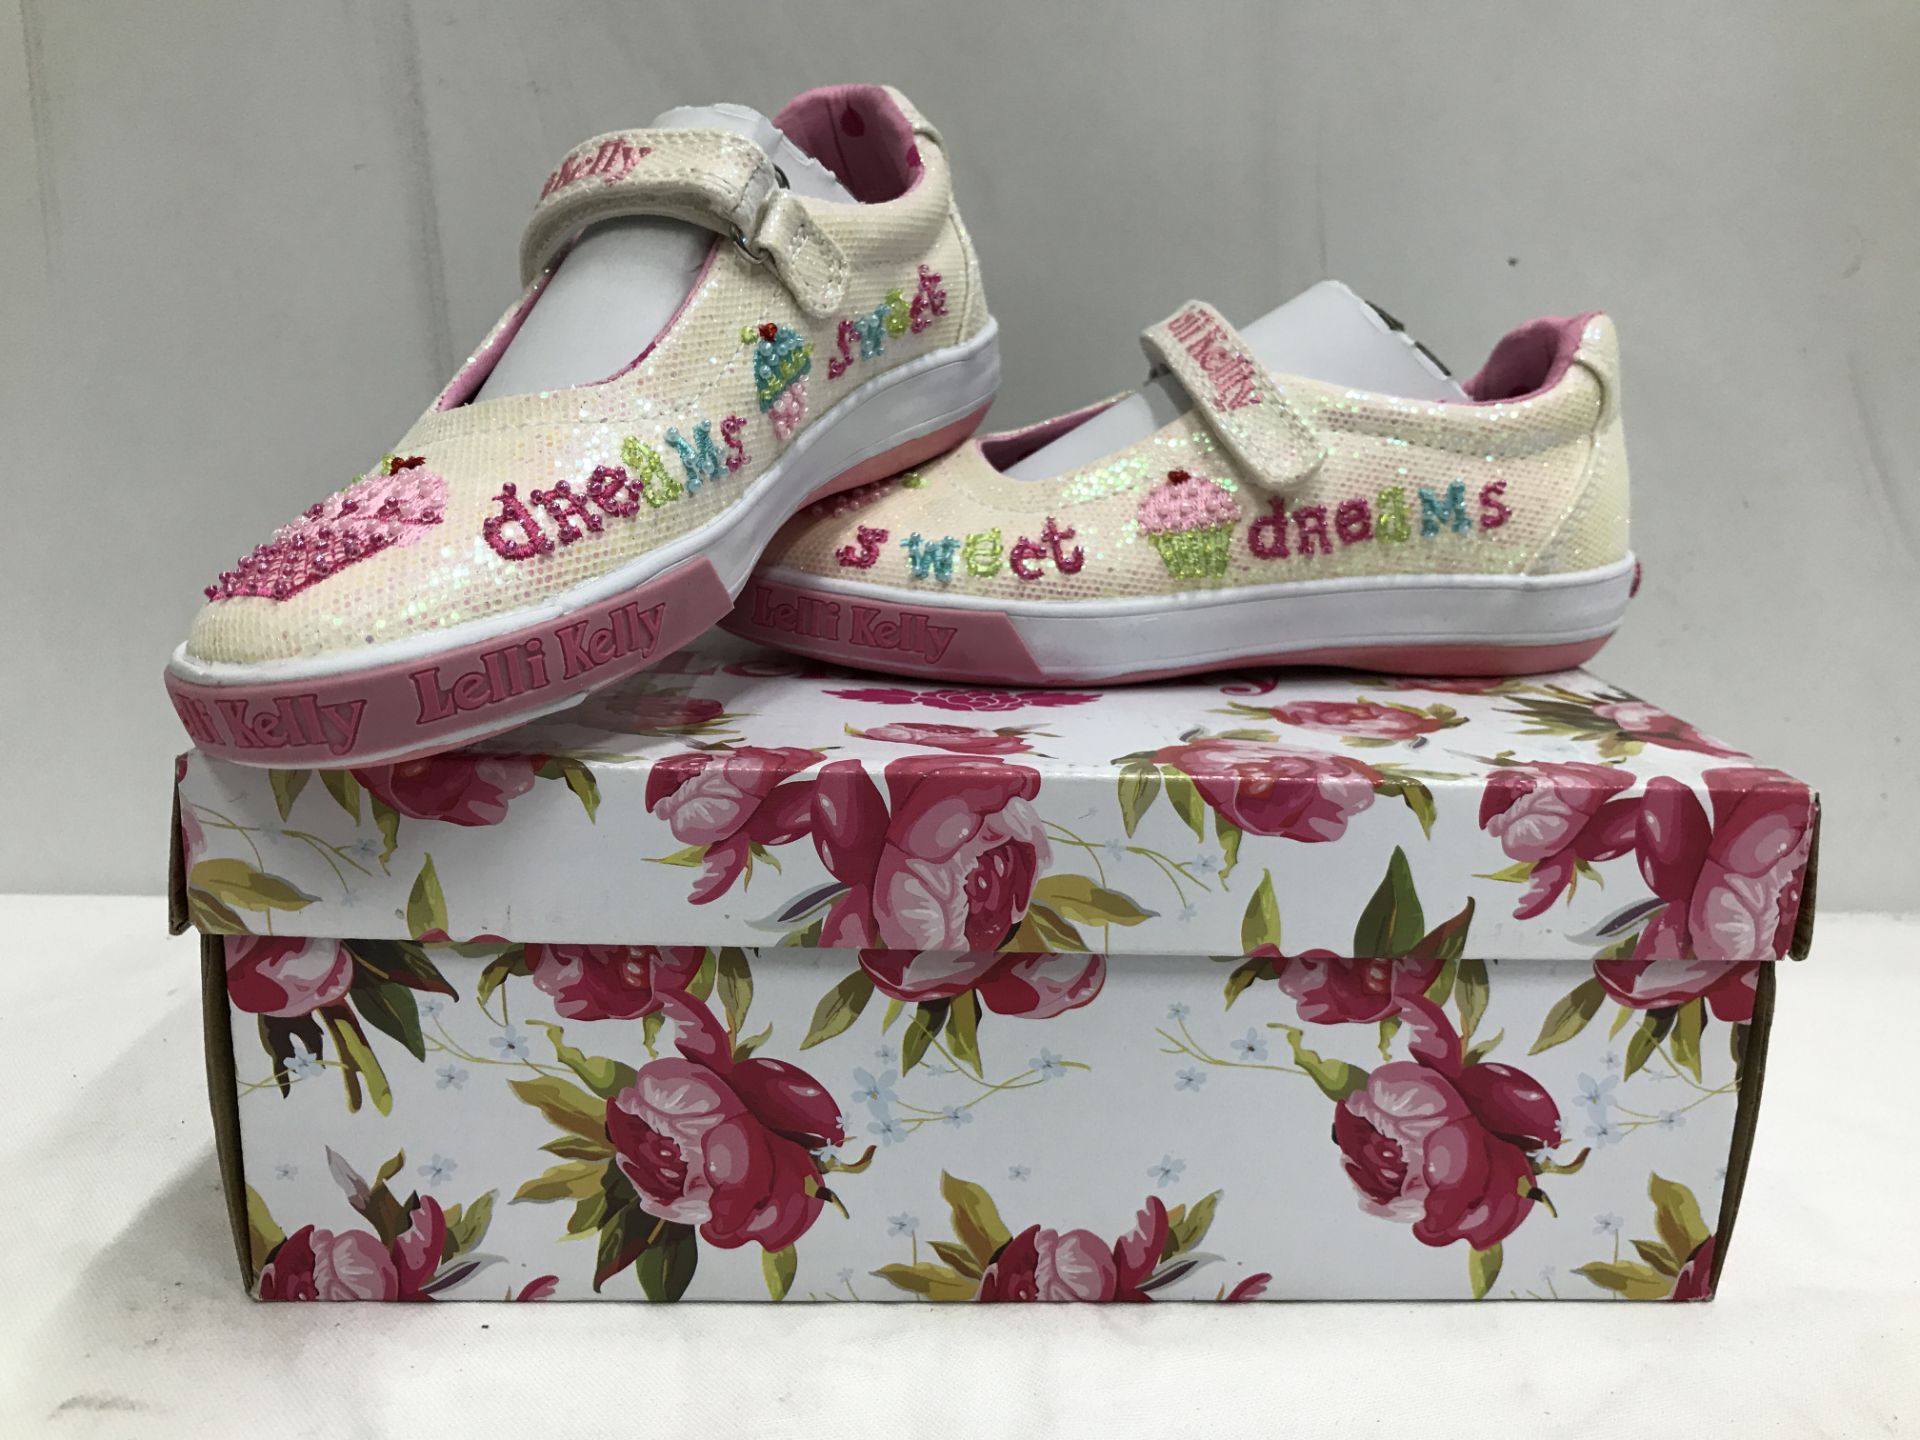 13 x Pairs of Lelli Kelly Children's Shoes - Various Designs - Size UK12.5 - Image 11 of 11